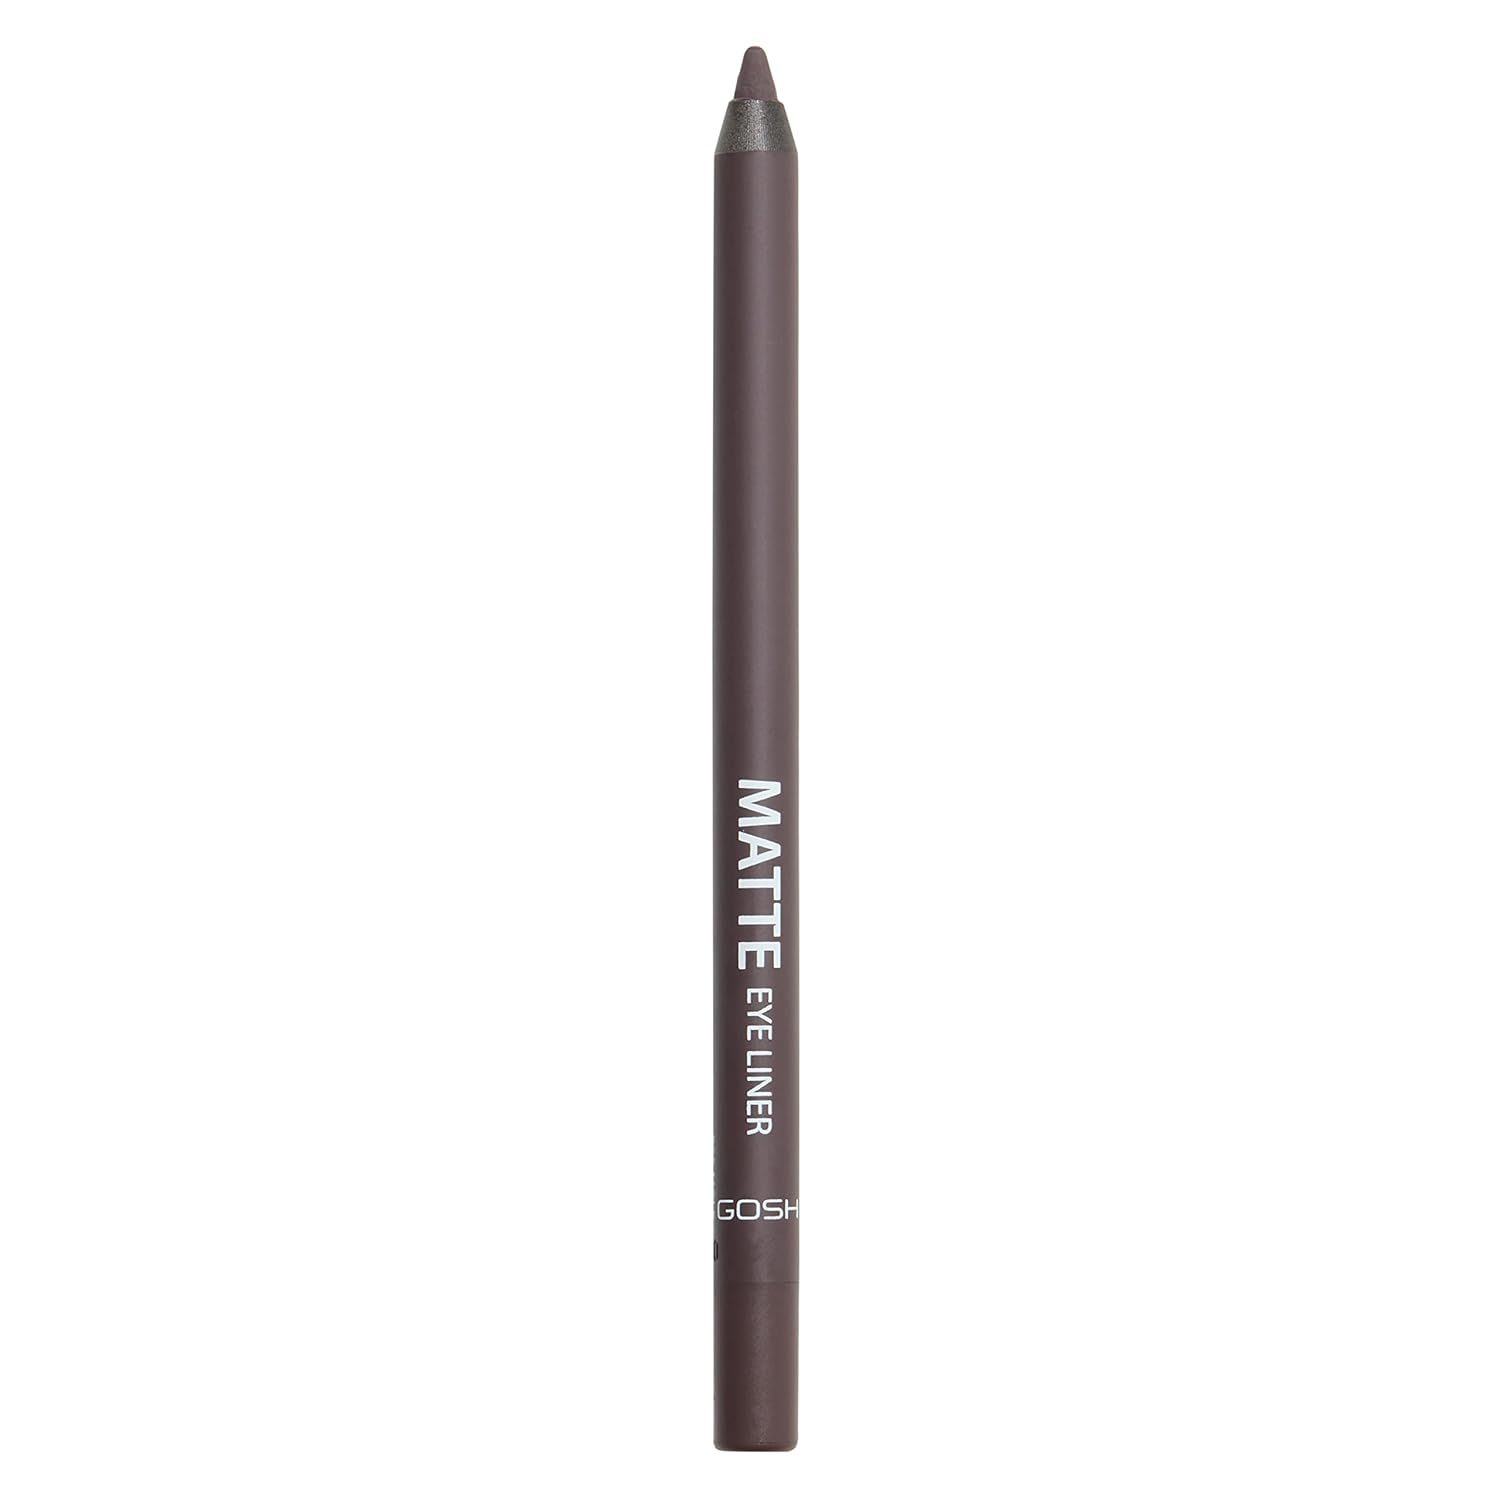 http://honestforwarder.com/uploads/product/lltJ0a4dKQ-gosh-matte-eyeliner-in-classic-brown-creamy-soft-texture-for-easy-application-high-coverage-ideal-for-smokey-eyes-perfect-for-mascara-vegan-and-fragrance-free-005-moles77.jpg